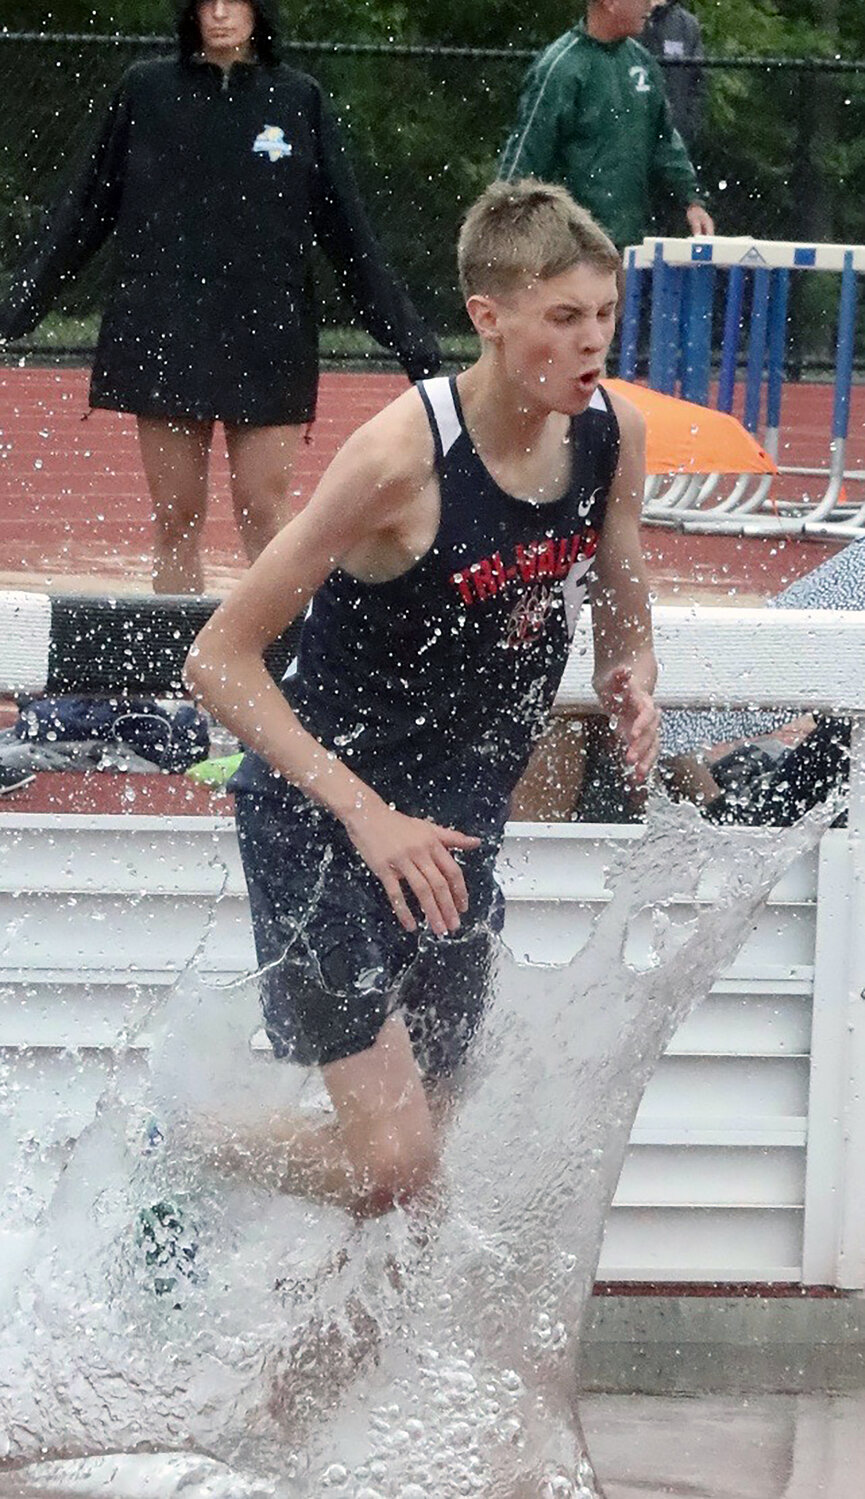 Tri-Valley sophomore Van Furman handily won the 2000 steeplechase. He looks forward to vying for gold at sectionals and states in the event.